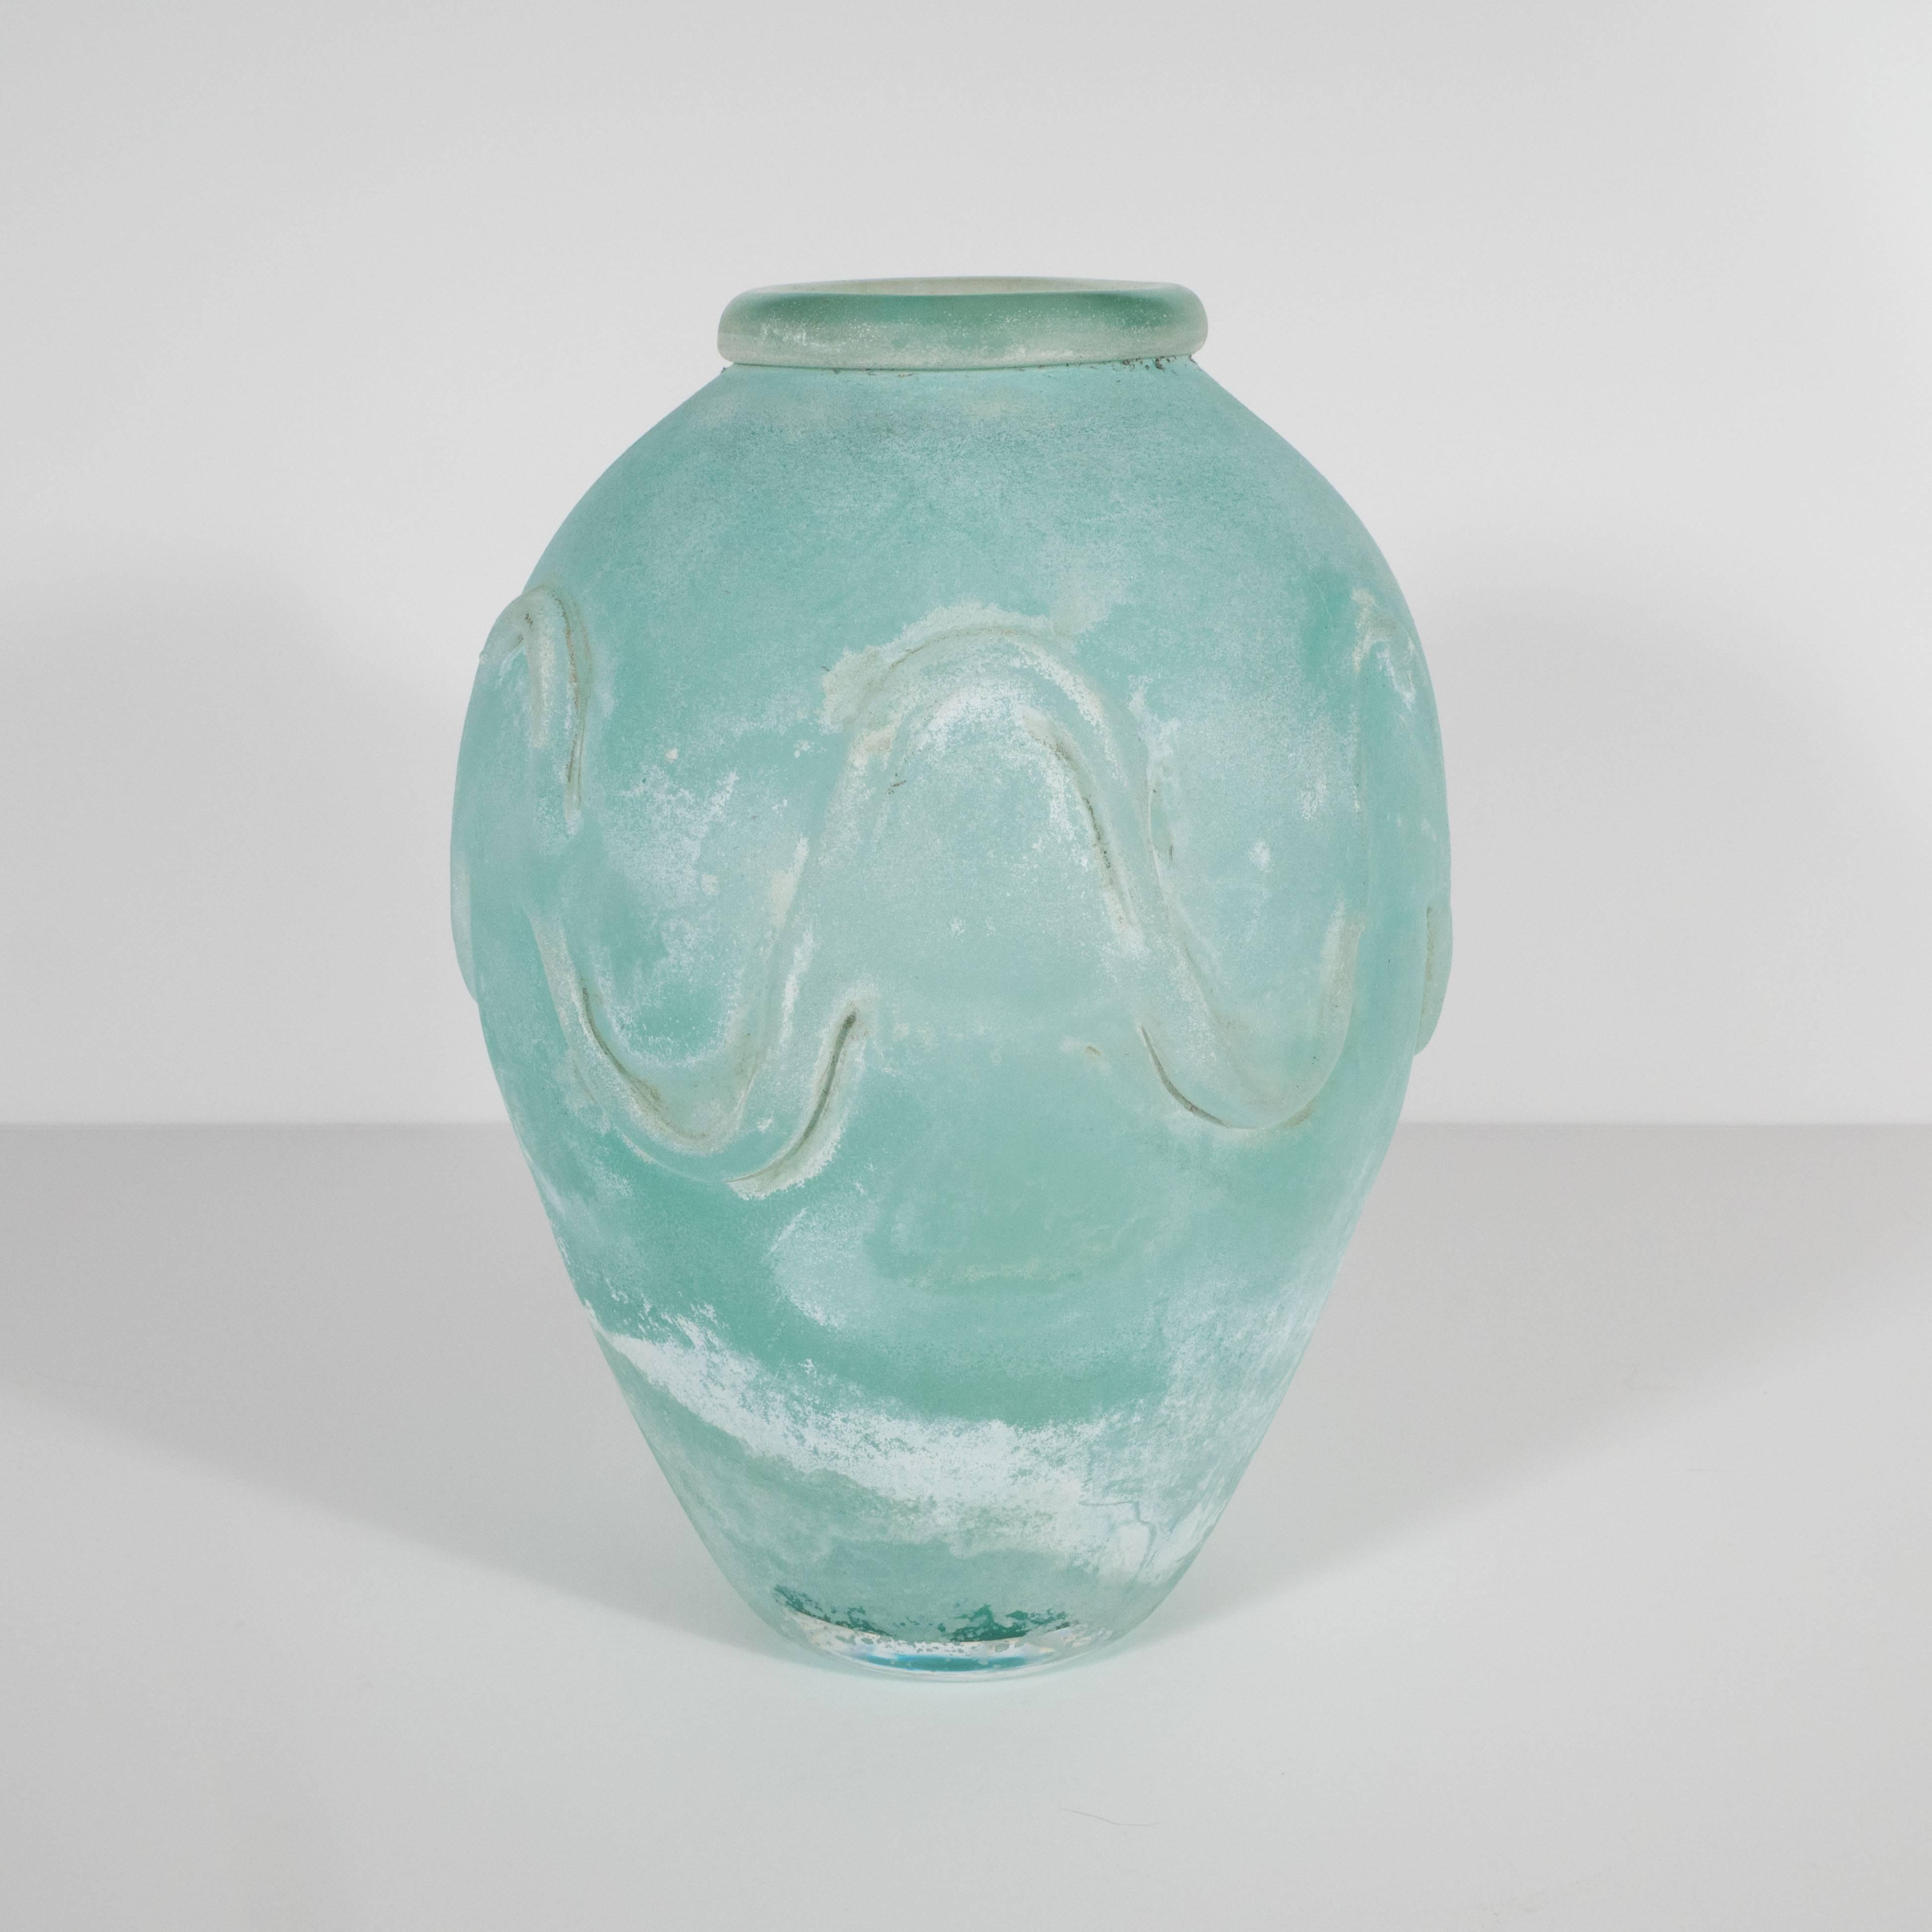 This stunning handblown vase was handblown on the Venetian island of Murano by Seguso- one of Italy's most illustrious producers. It is inscribed on the side with a wave pattern that mirrors the sinuous curves of the form itself. The Scavo finished